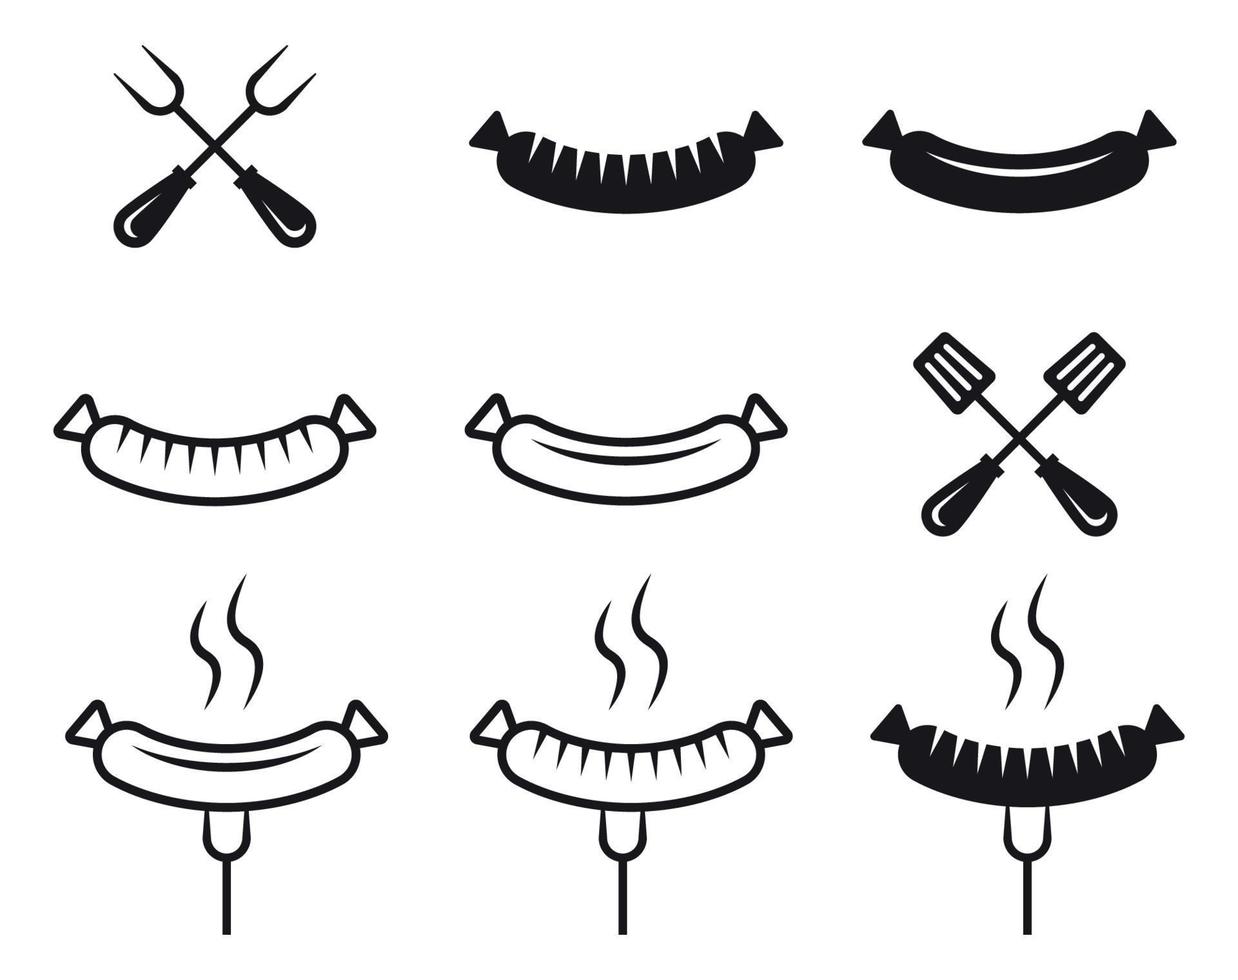 Sausage icons set. Black on a white background vector